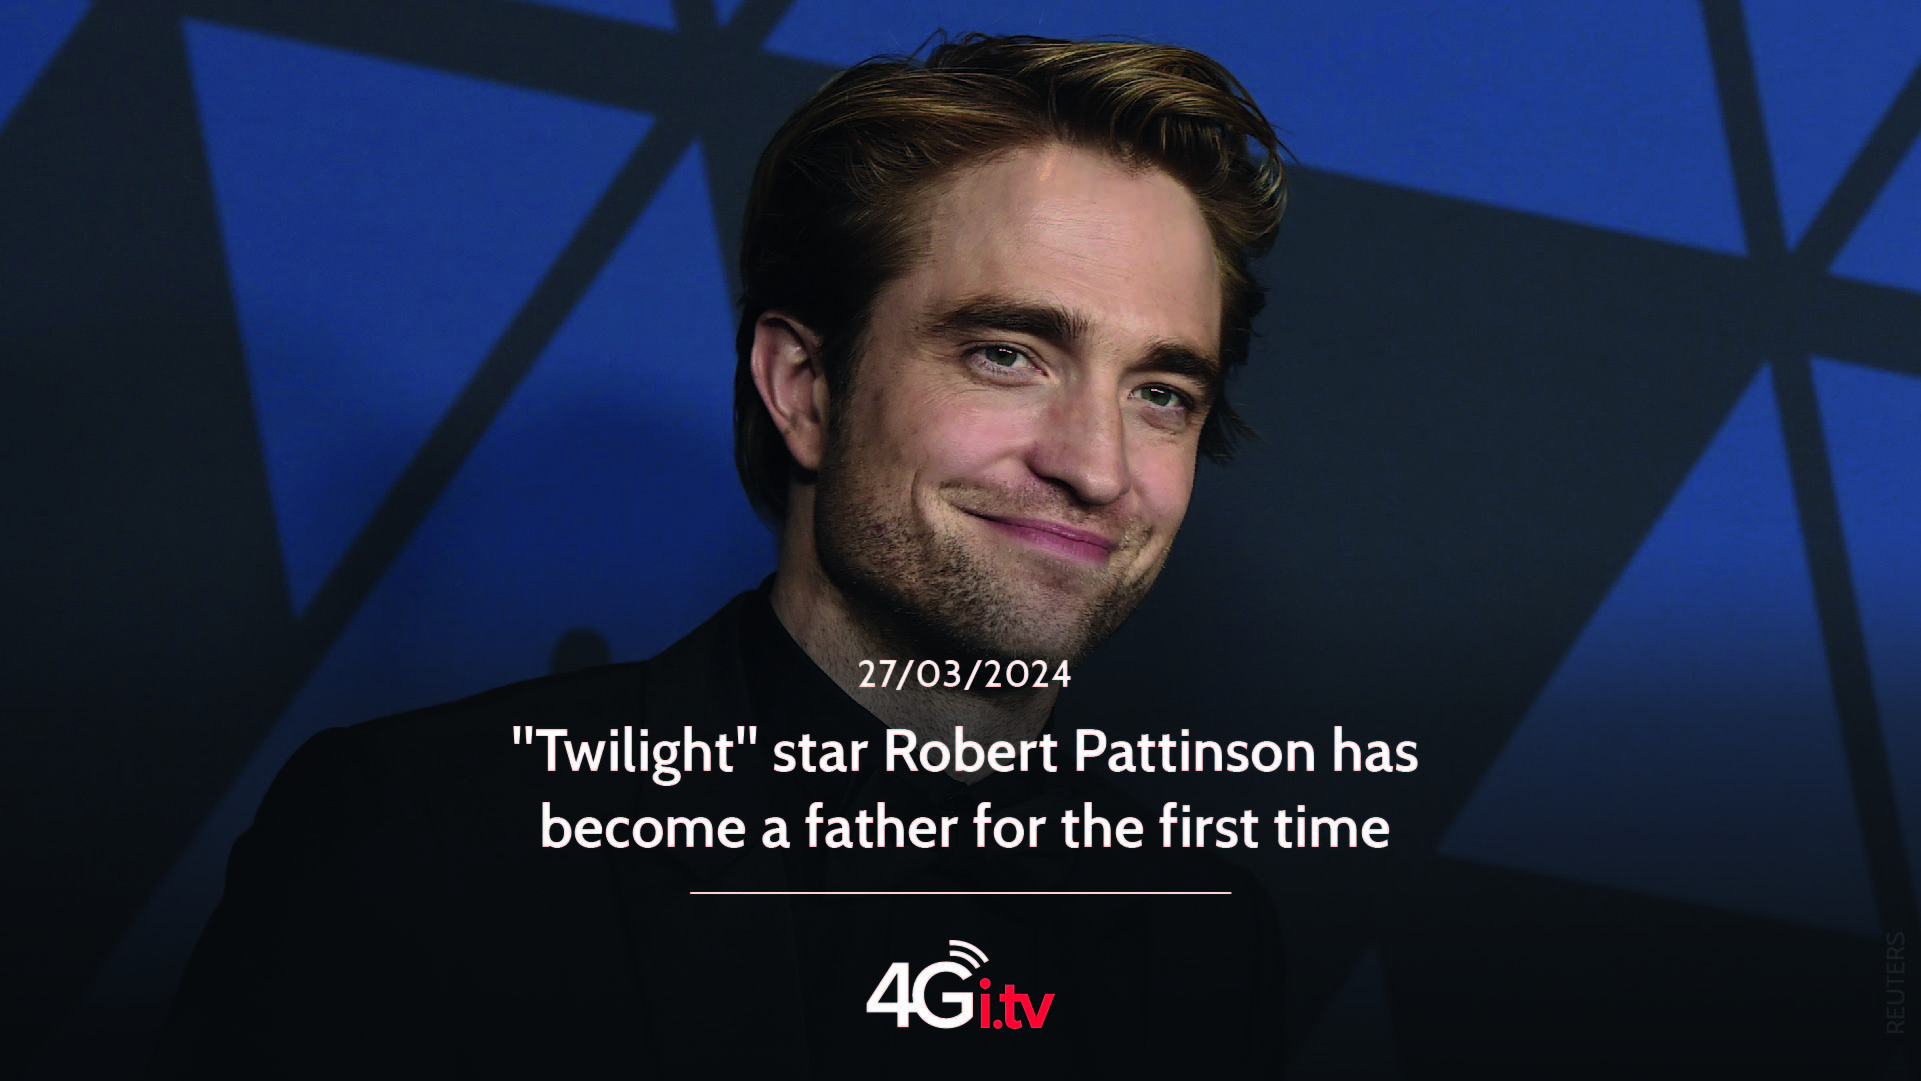 Подробнее о статье “Twilight” star Robert Pattinson has become a father for the first time